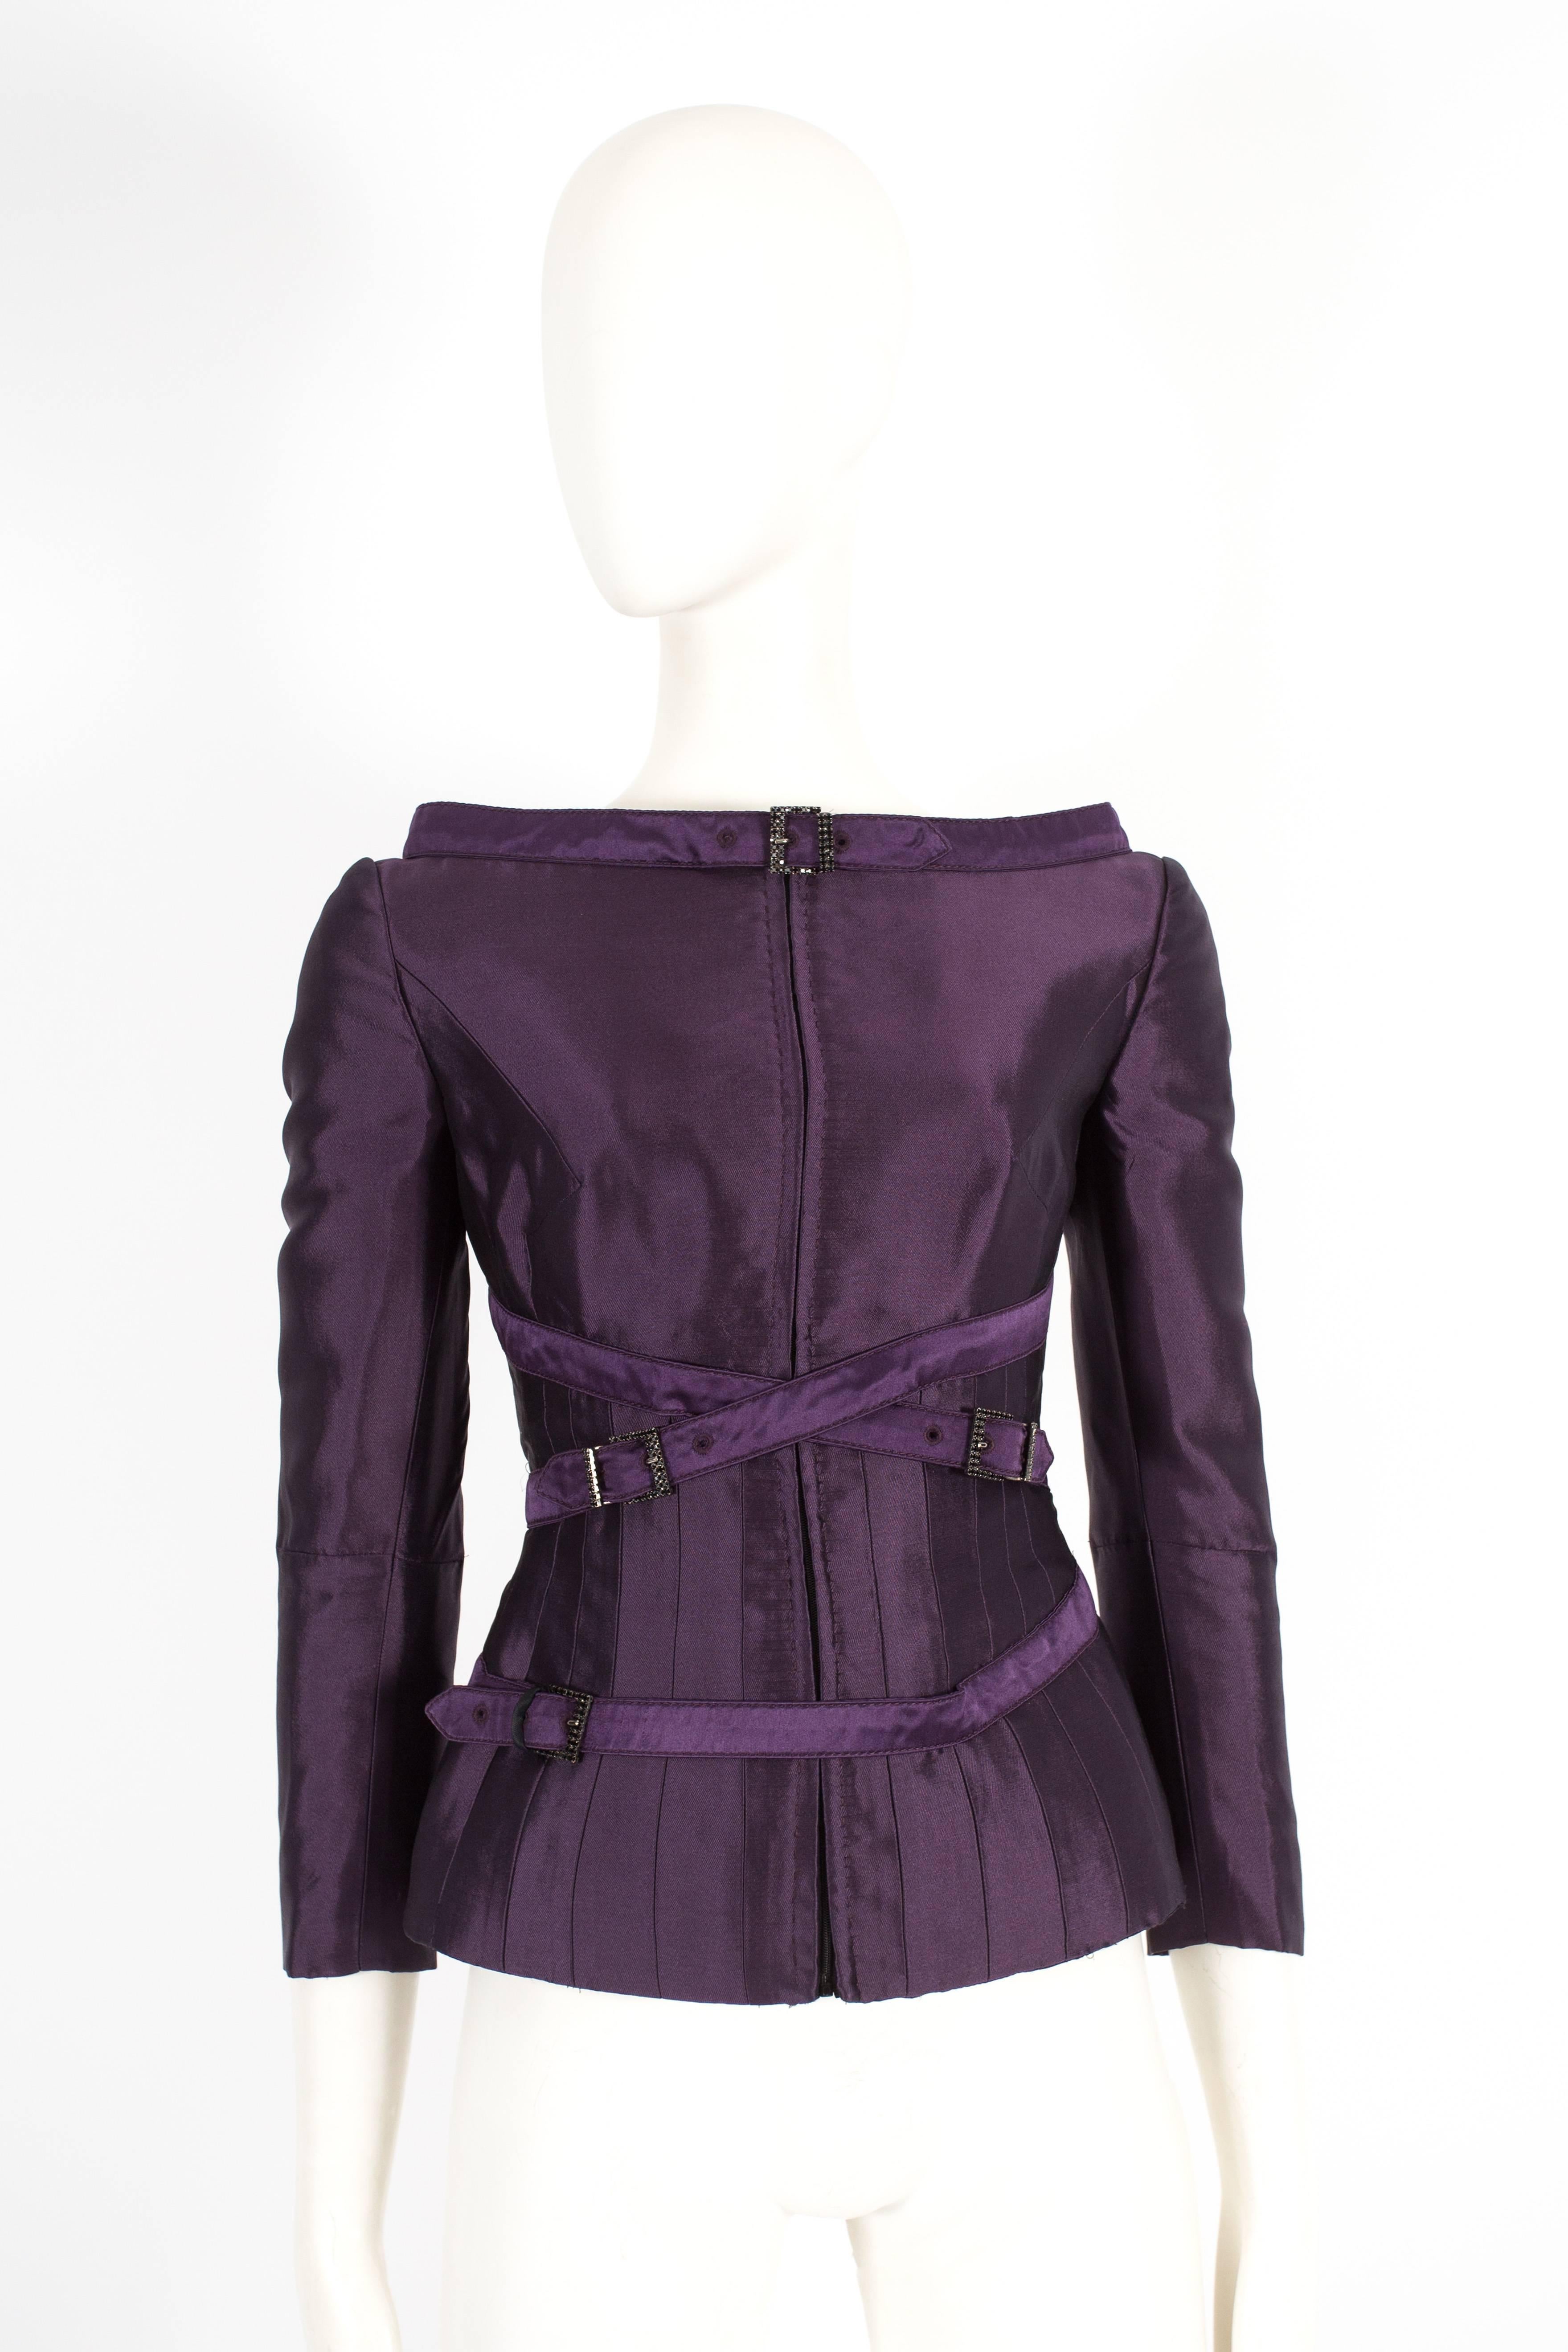 Introducing a captivating Alexander McQueen evening jacket from the autumn-winter 2007 collection. This jacket is a true representation of the brand's innovative design and luxurious craftsmanship.

Constructed in a rich plum silk taffeta, the